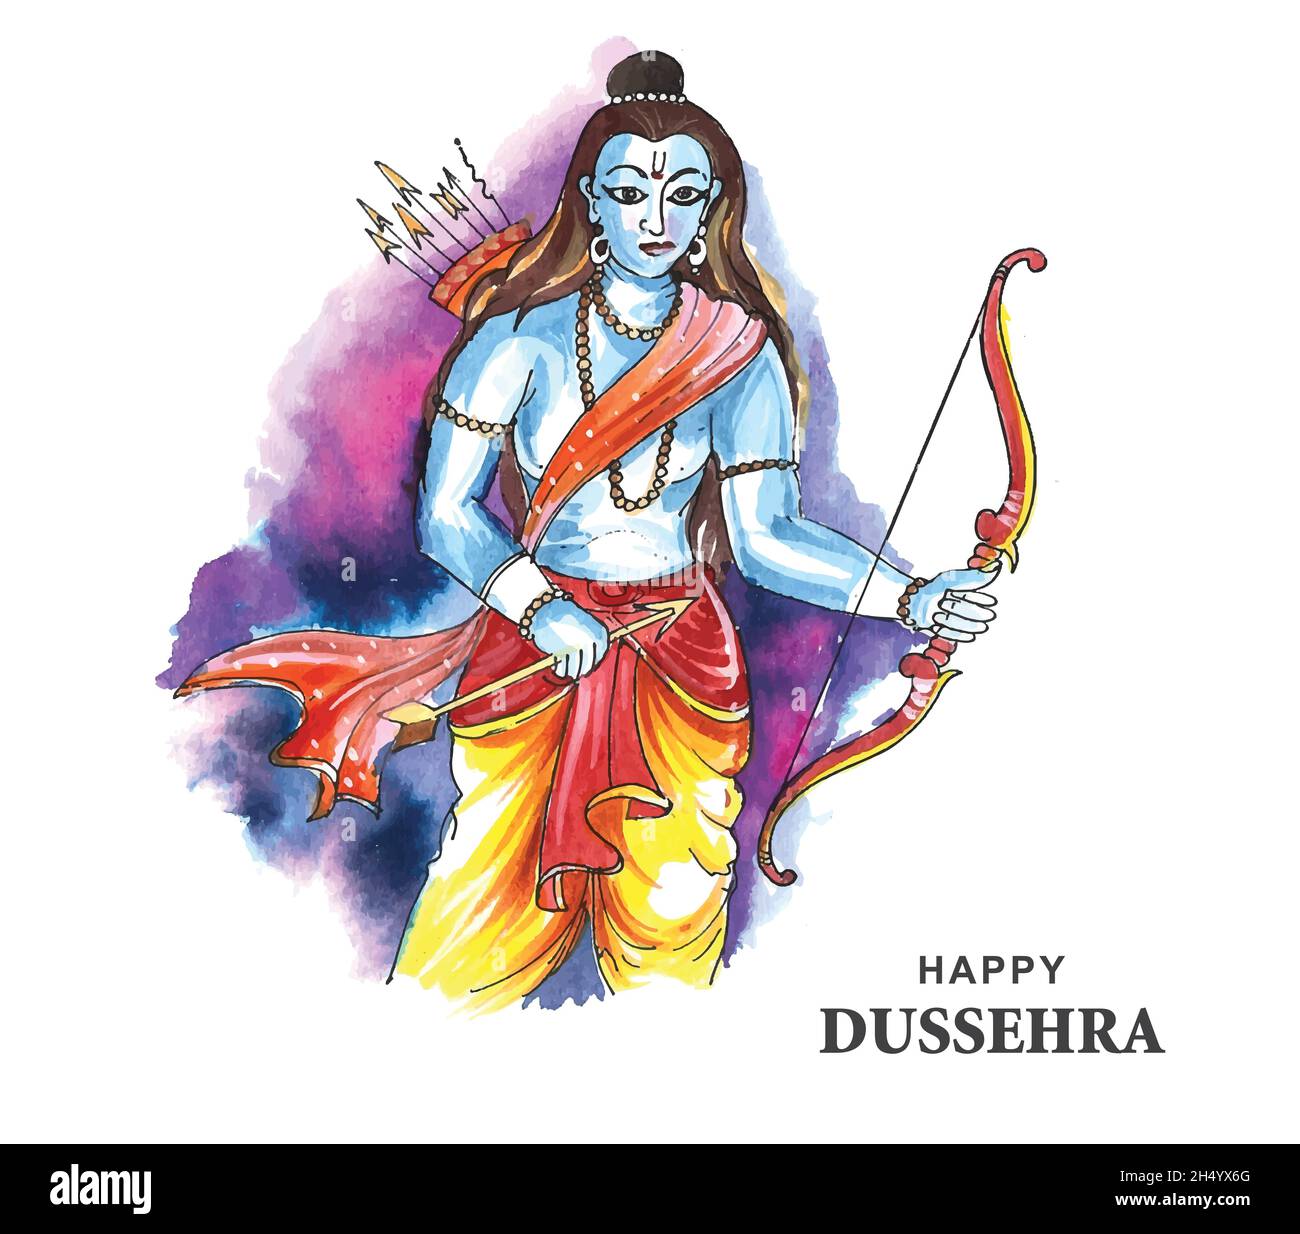 Lord rama happy dussehra festival wishes card watercolor ...